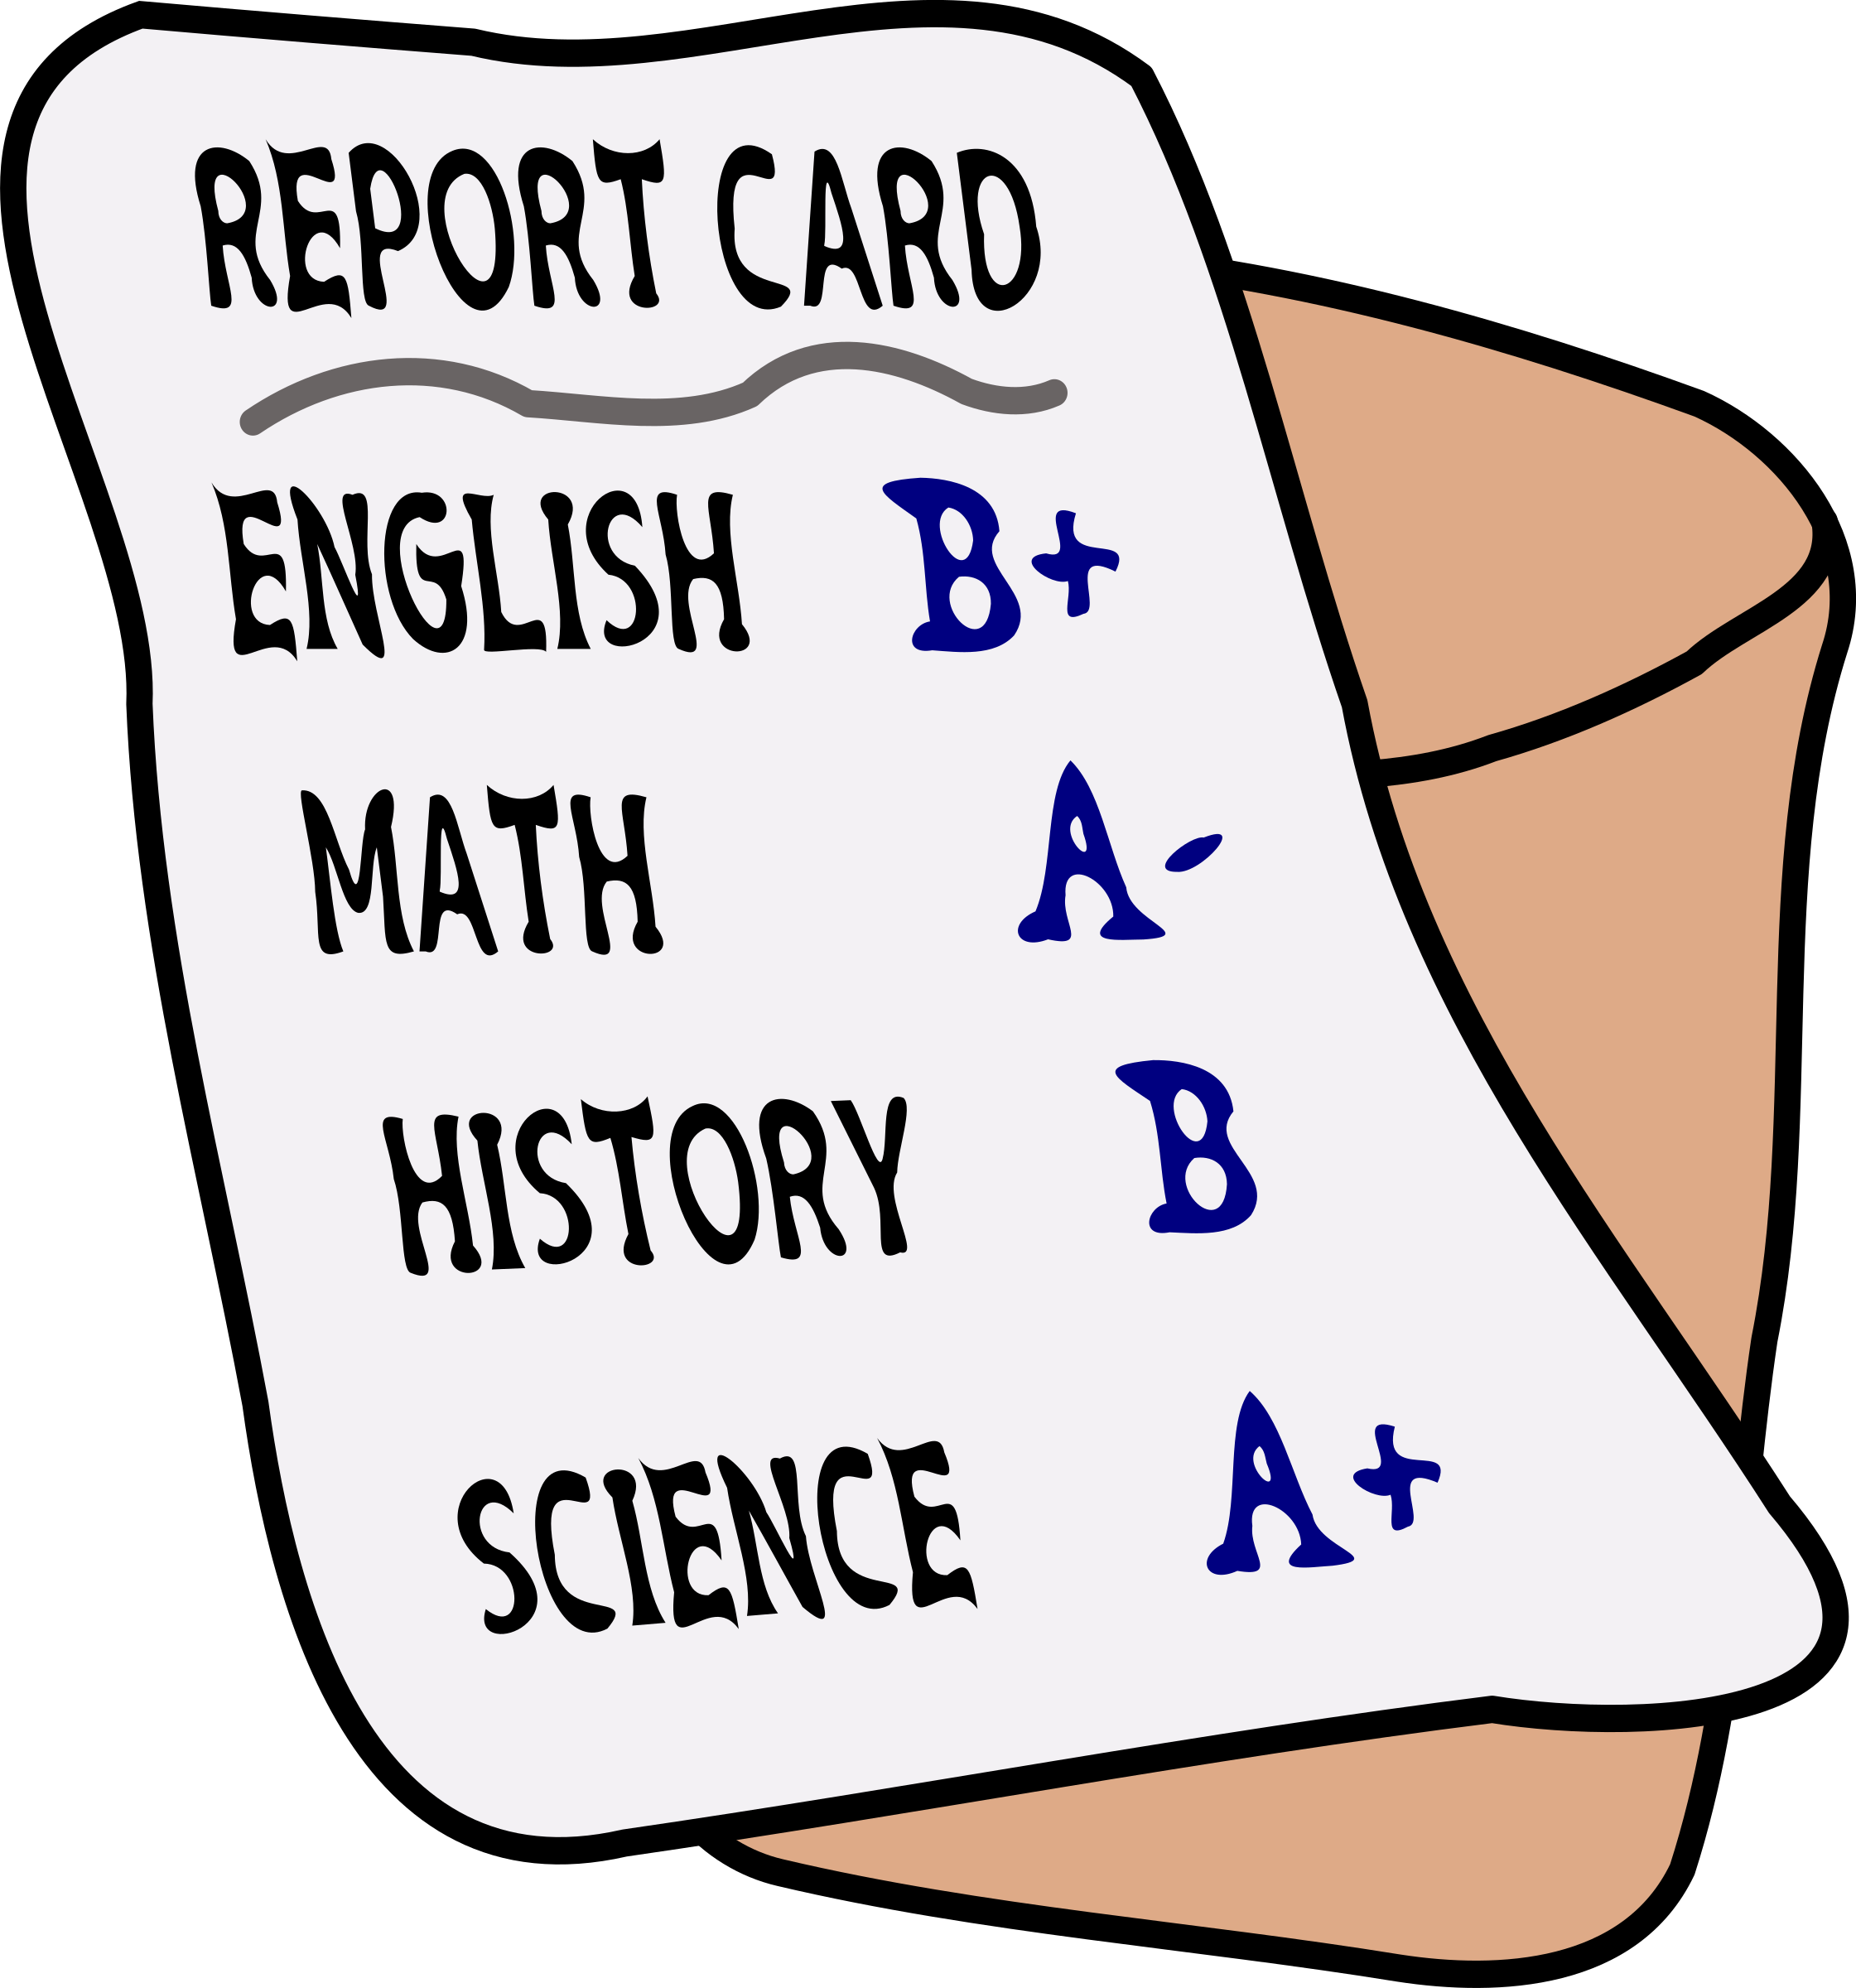 a-report-card-png-transparent-a-report-card-png-images-pluspng